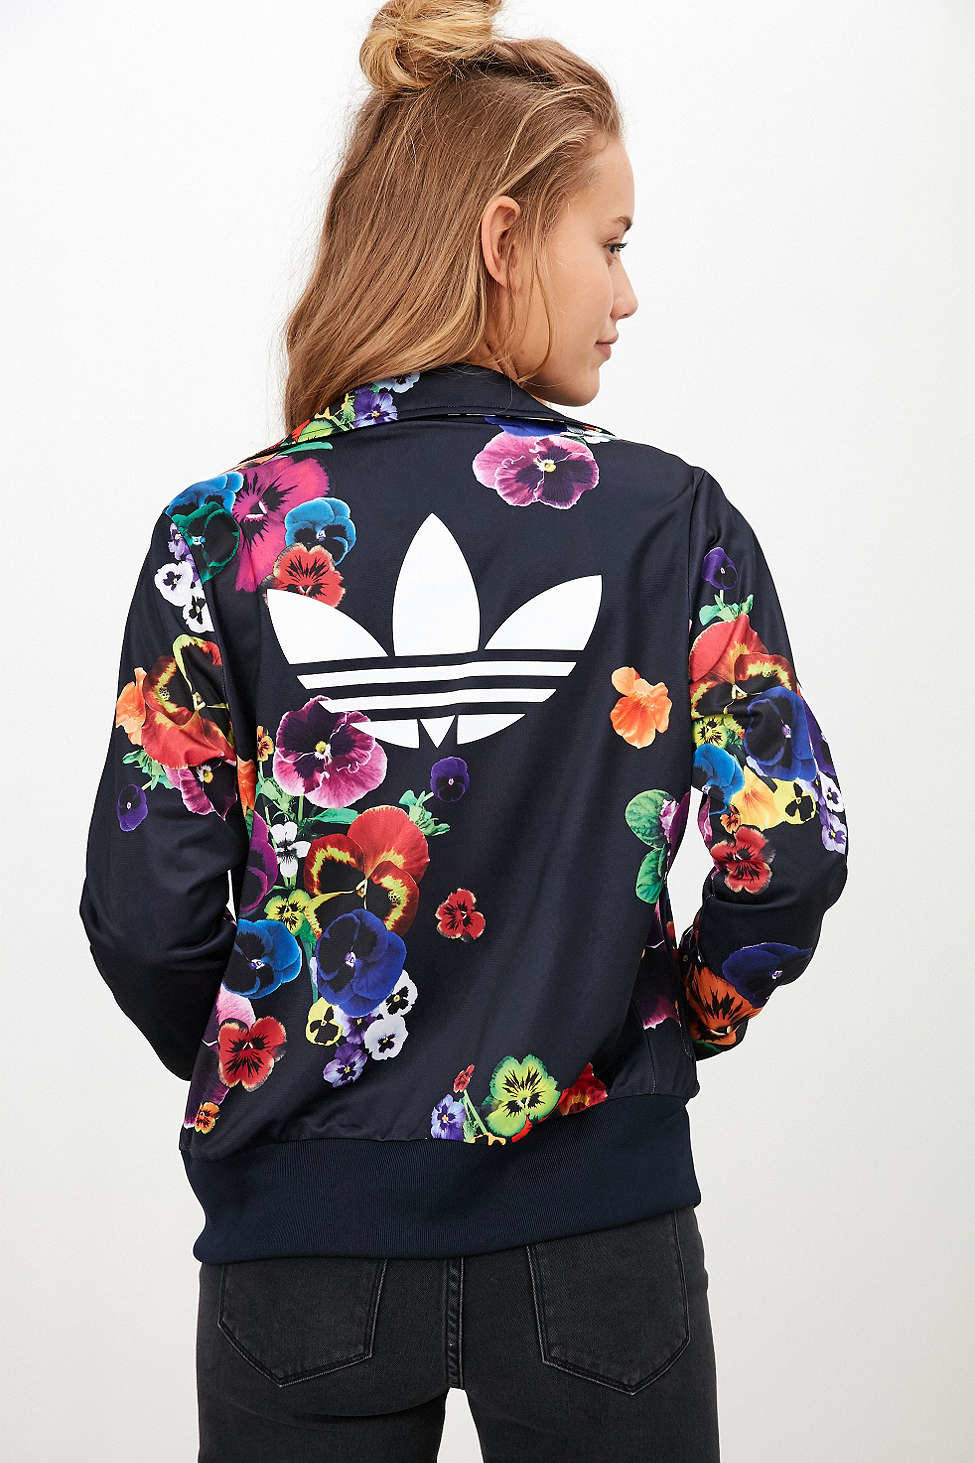 adidas floral bomber